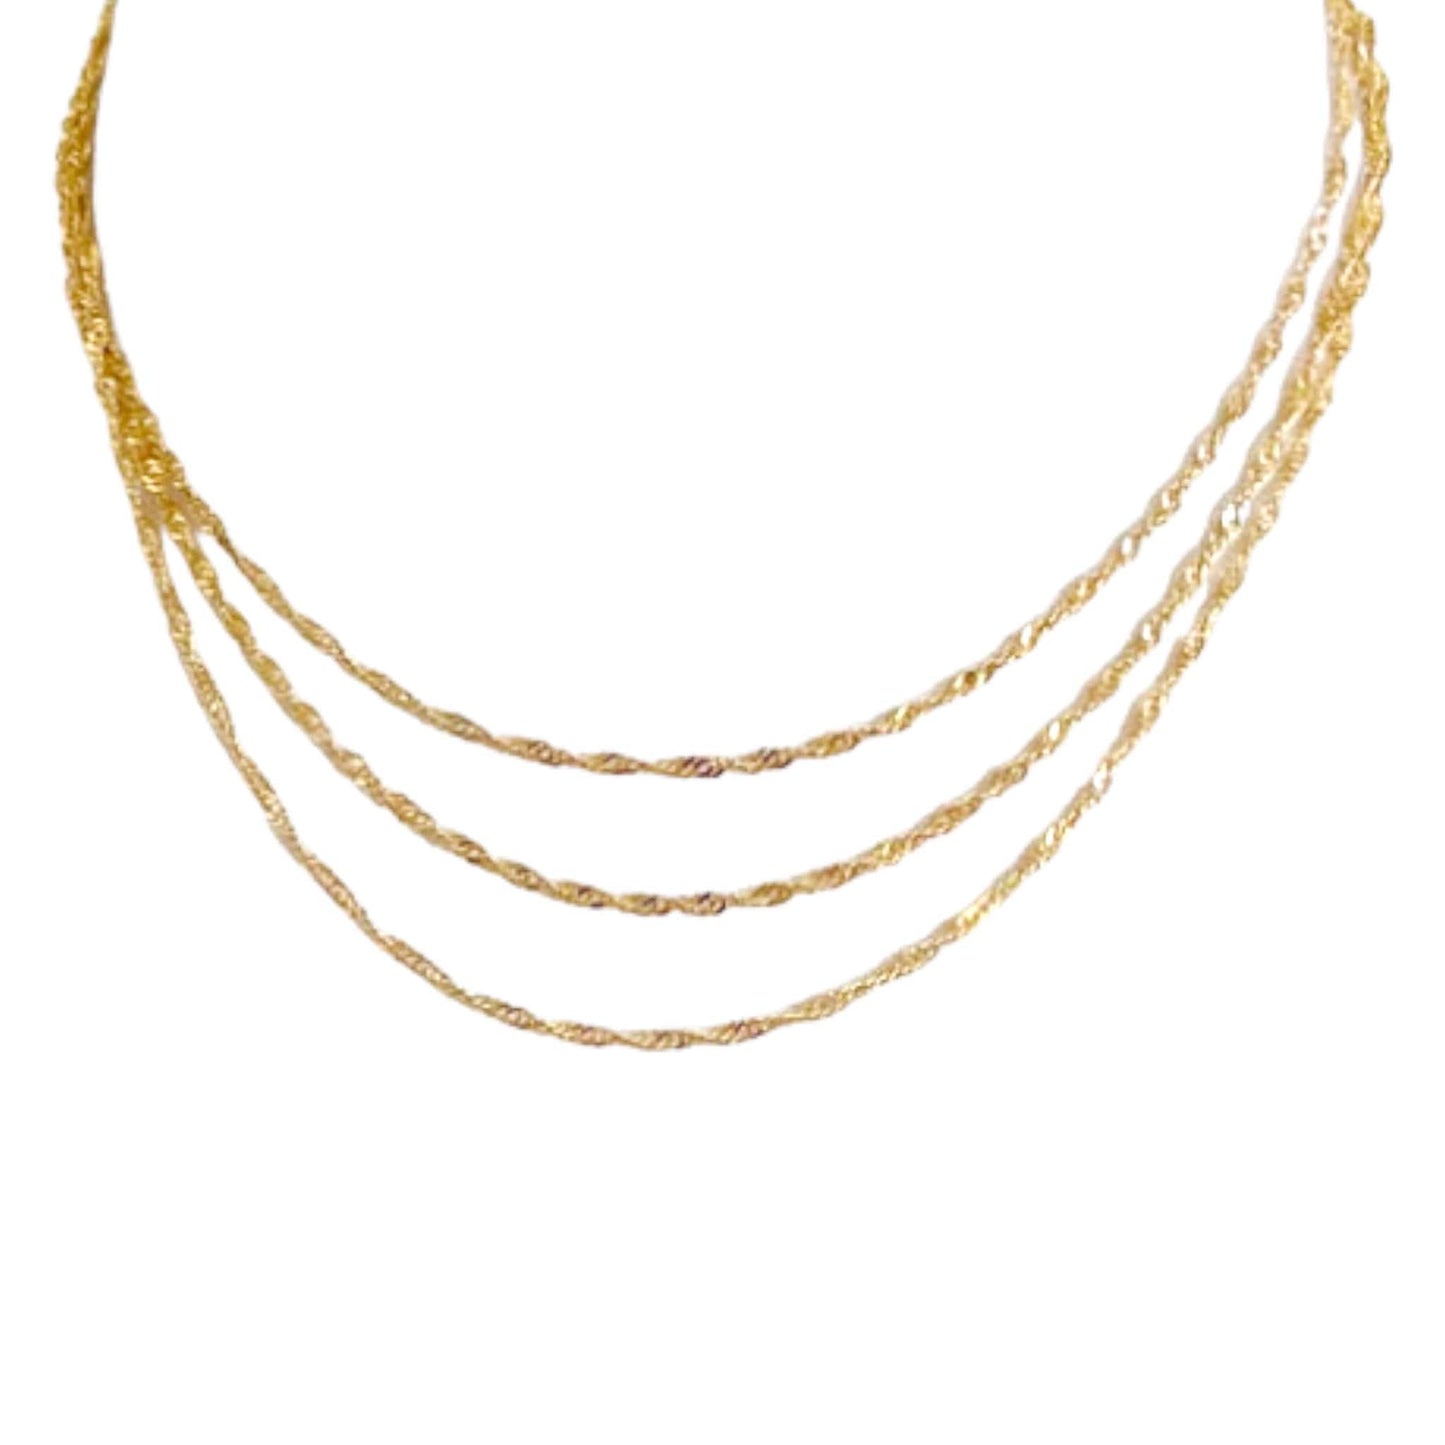 Triple Gold Plated Twisted Chain Necklace